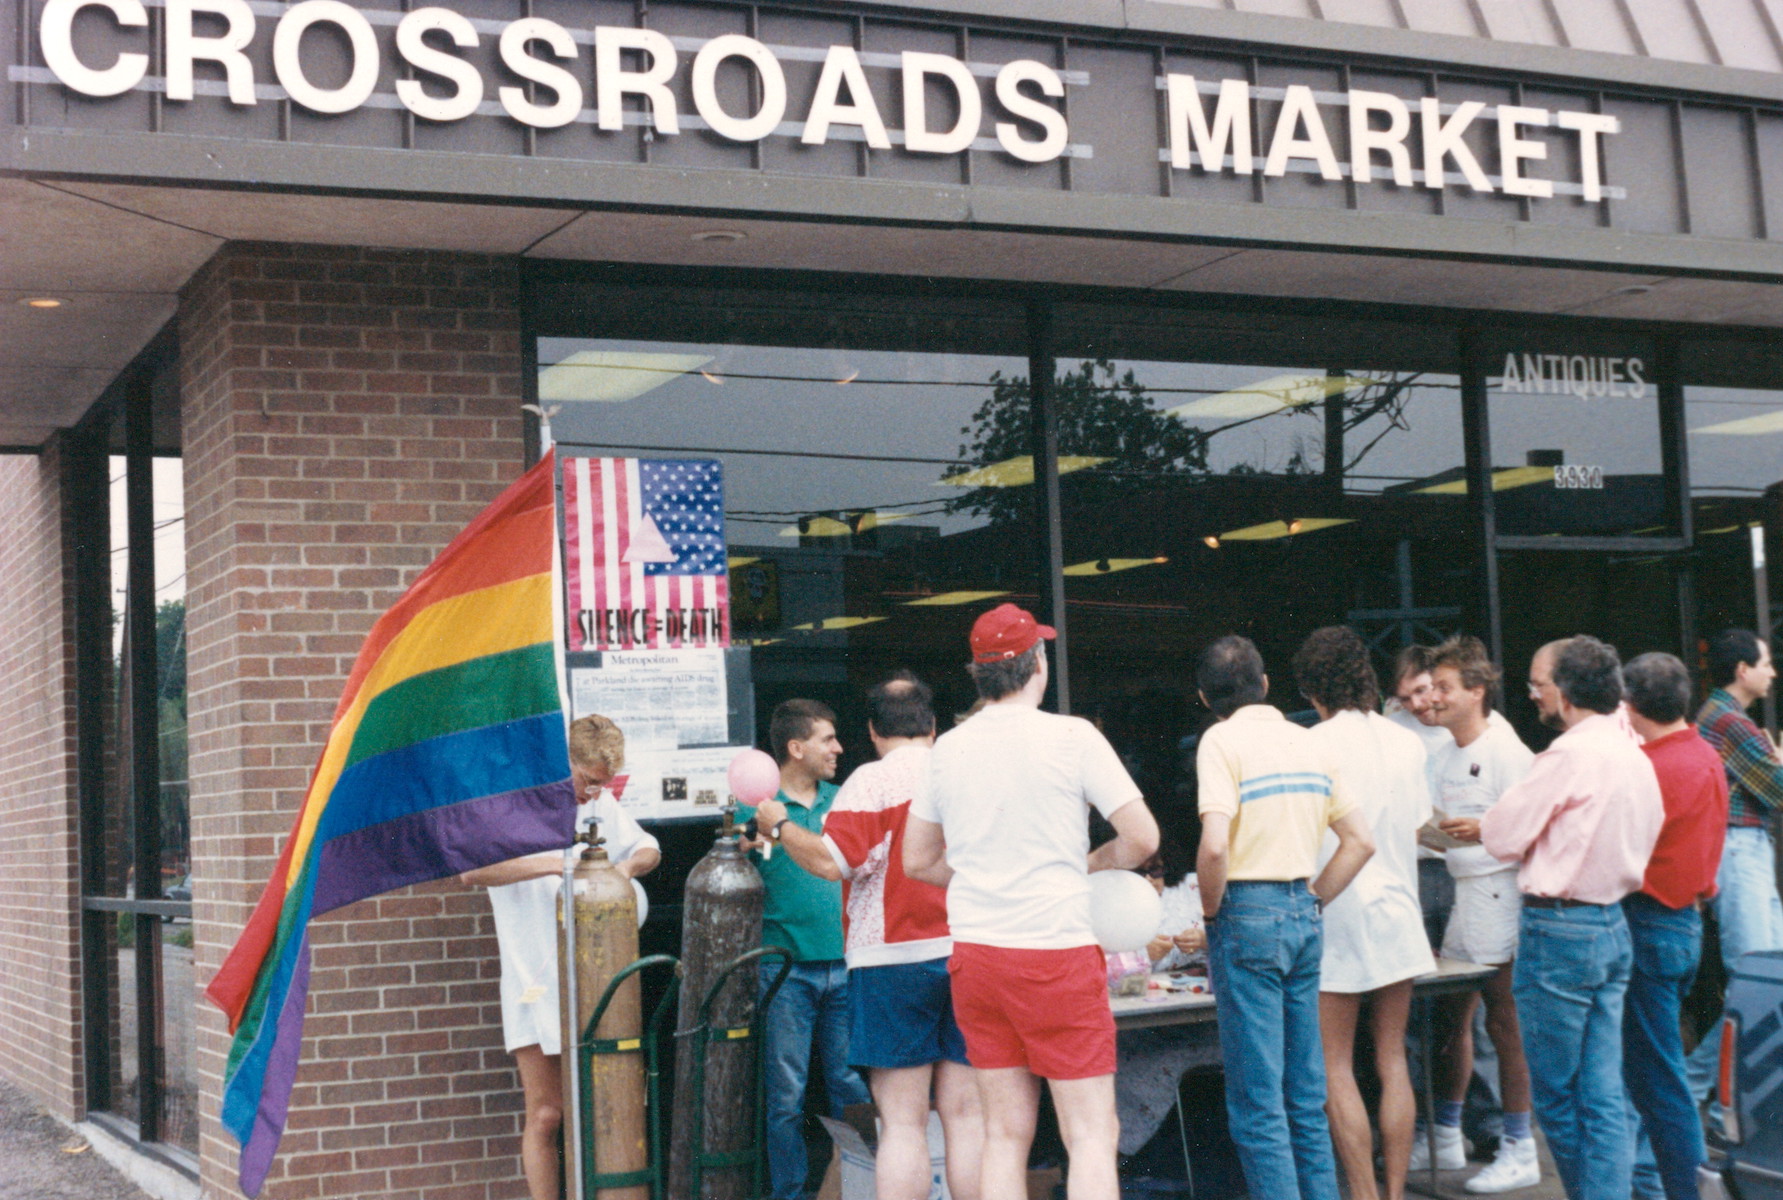 Gay activists gathered outside the Crossroads Market for an impromptu food drive, Dallas, TX, circa 1985. William shares, “In the 80s, our store was a hotbed of activism and political organizing – some group was out front every weekend recruiting volunteers for the next demonstration, working behind the scenes, etc. Many initiatives began inside the store. When Bill discovered that two guys with AIDS didn't have any food, he put a sign in the front window asking people to drop off a can of food. By the next morning, the entrance to the store was overwhelmed with packages of food. And again the next day, and the next, and finally we had so much food that we created a food bank that is still in existence today. The community responded in ways we never imagined.” Photo courtesy of William Waybourn.